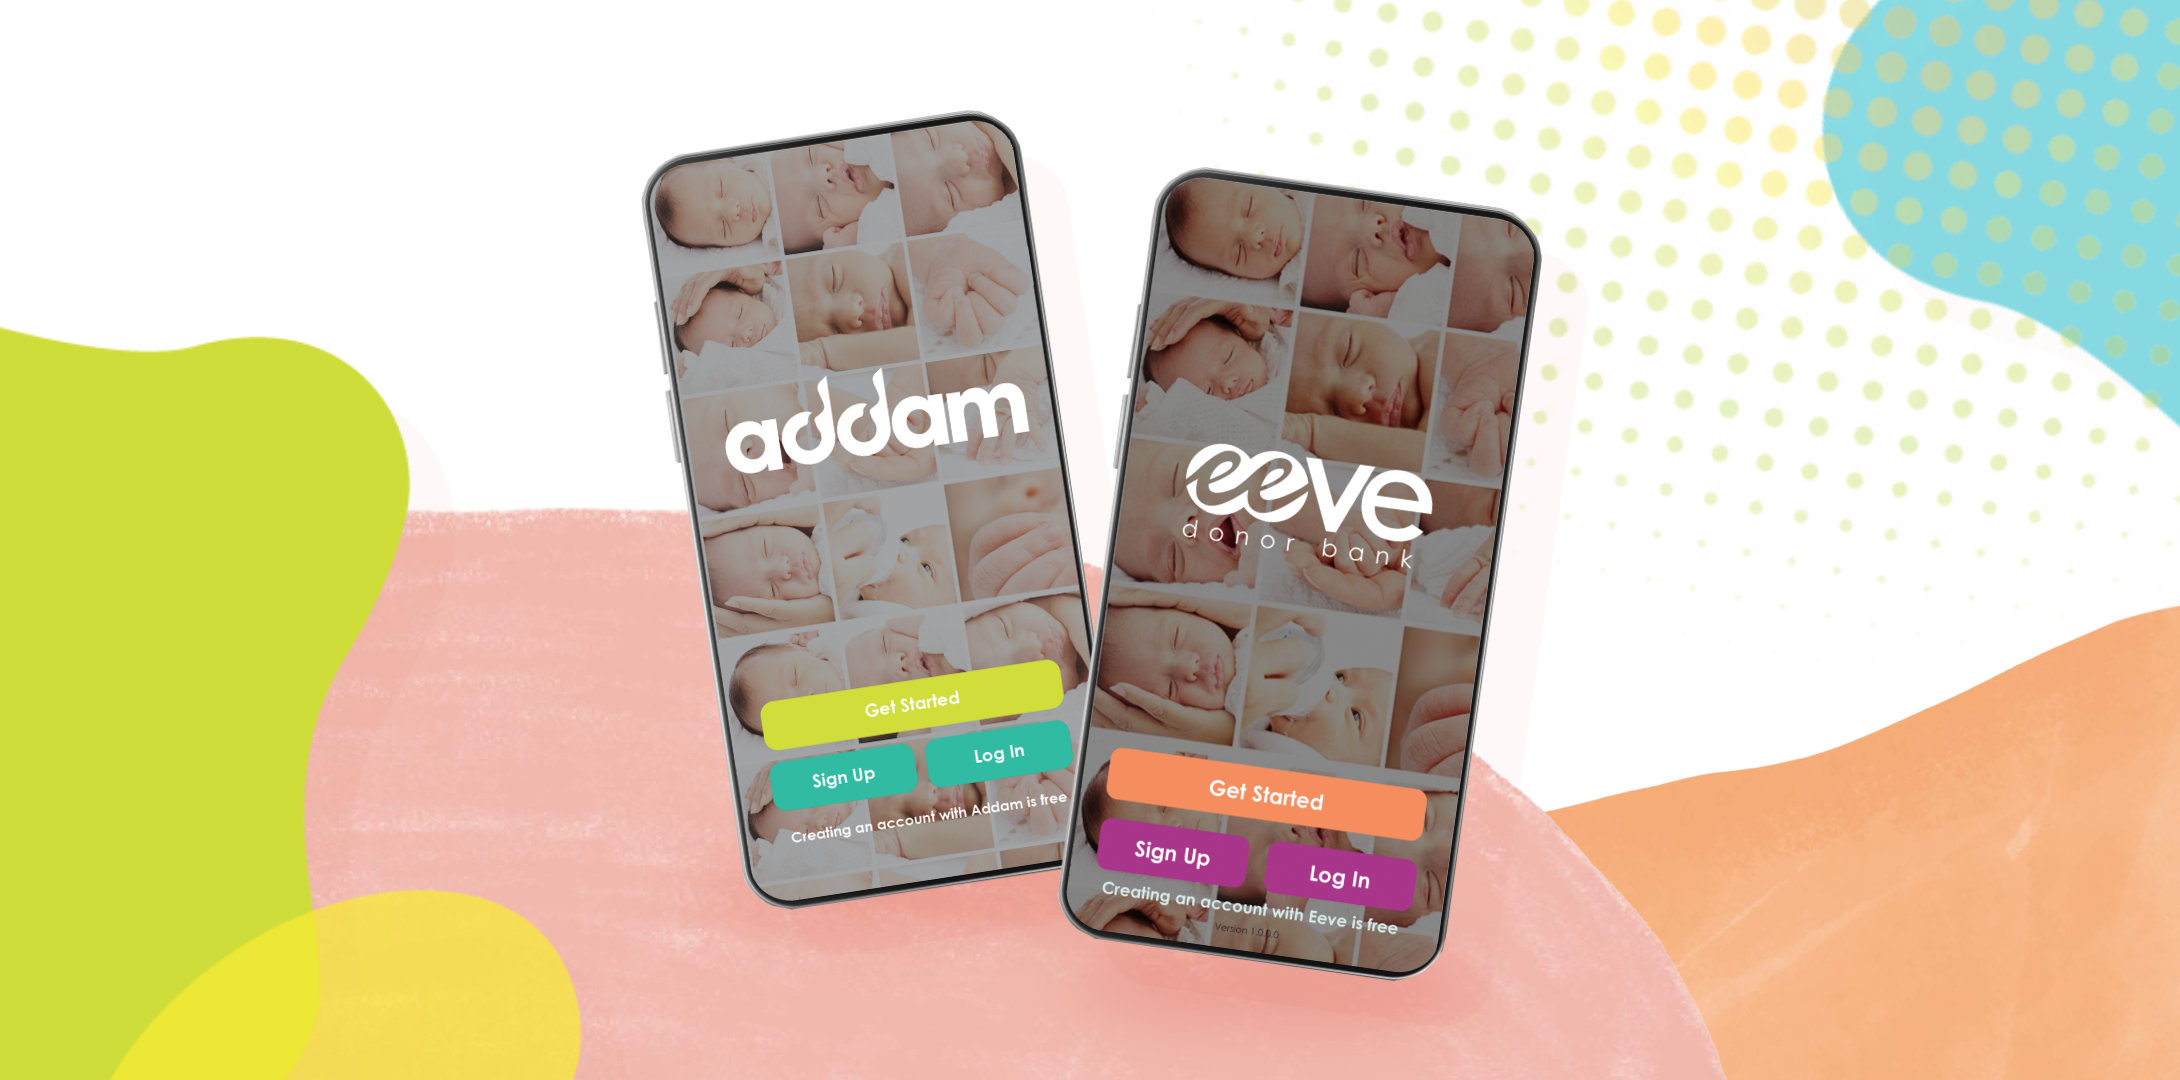 Addam & Eeve Donor Bank Apps!